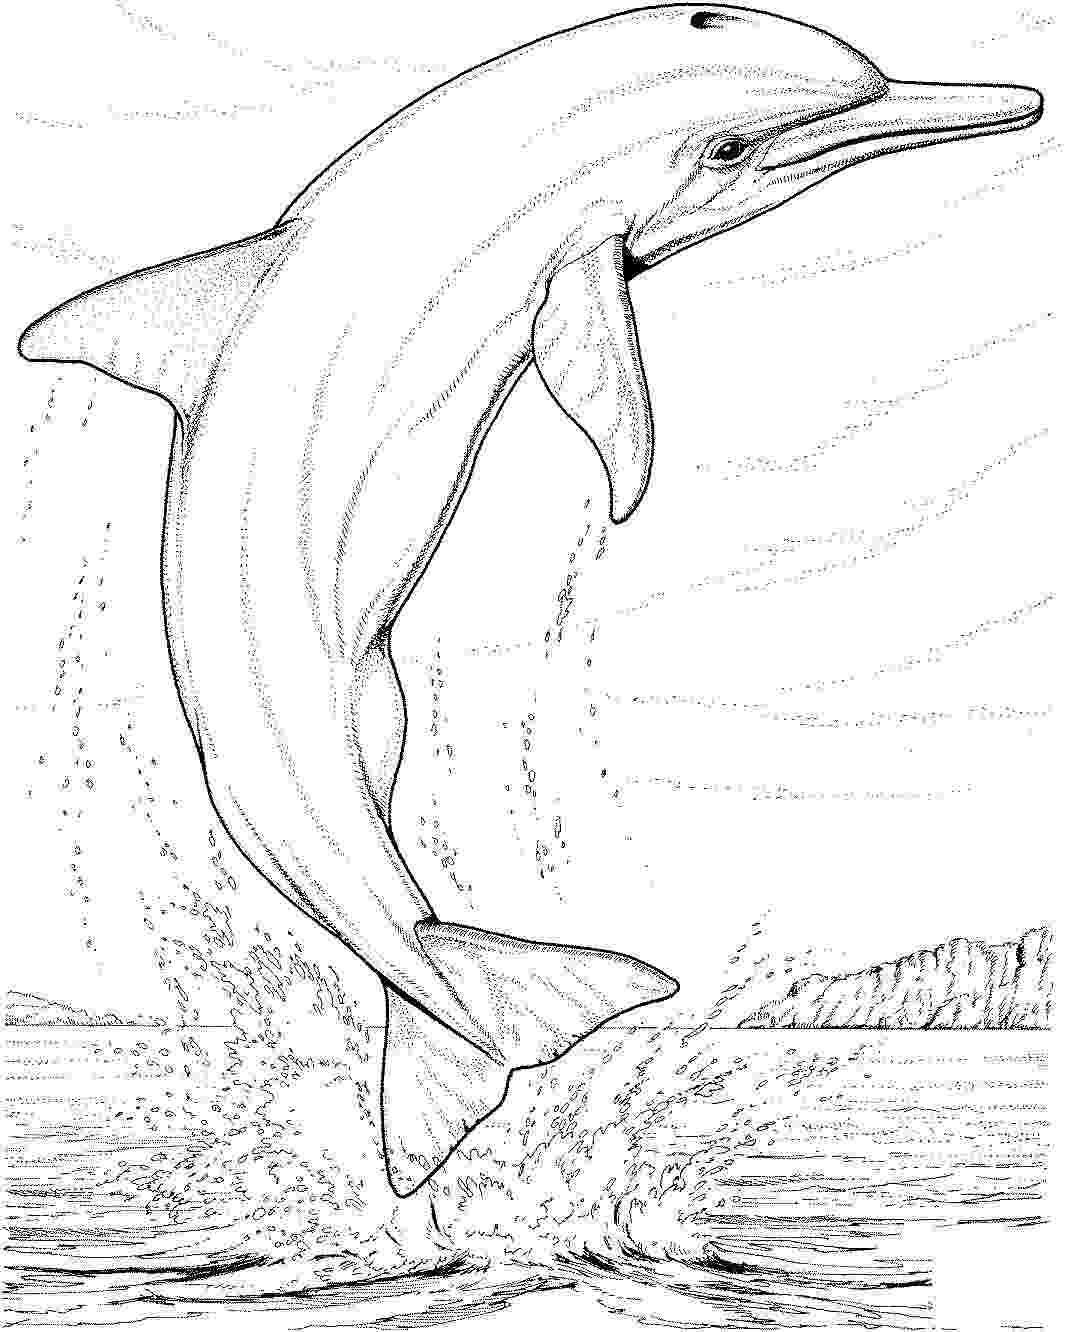 The spinner dolphin has acrobatic displays through the air from Dolphin